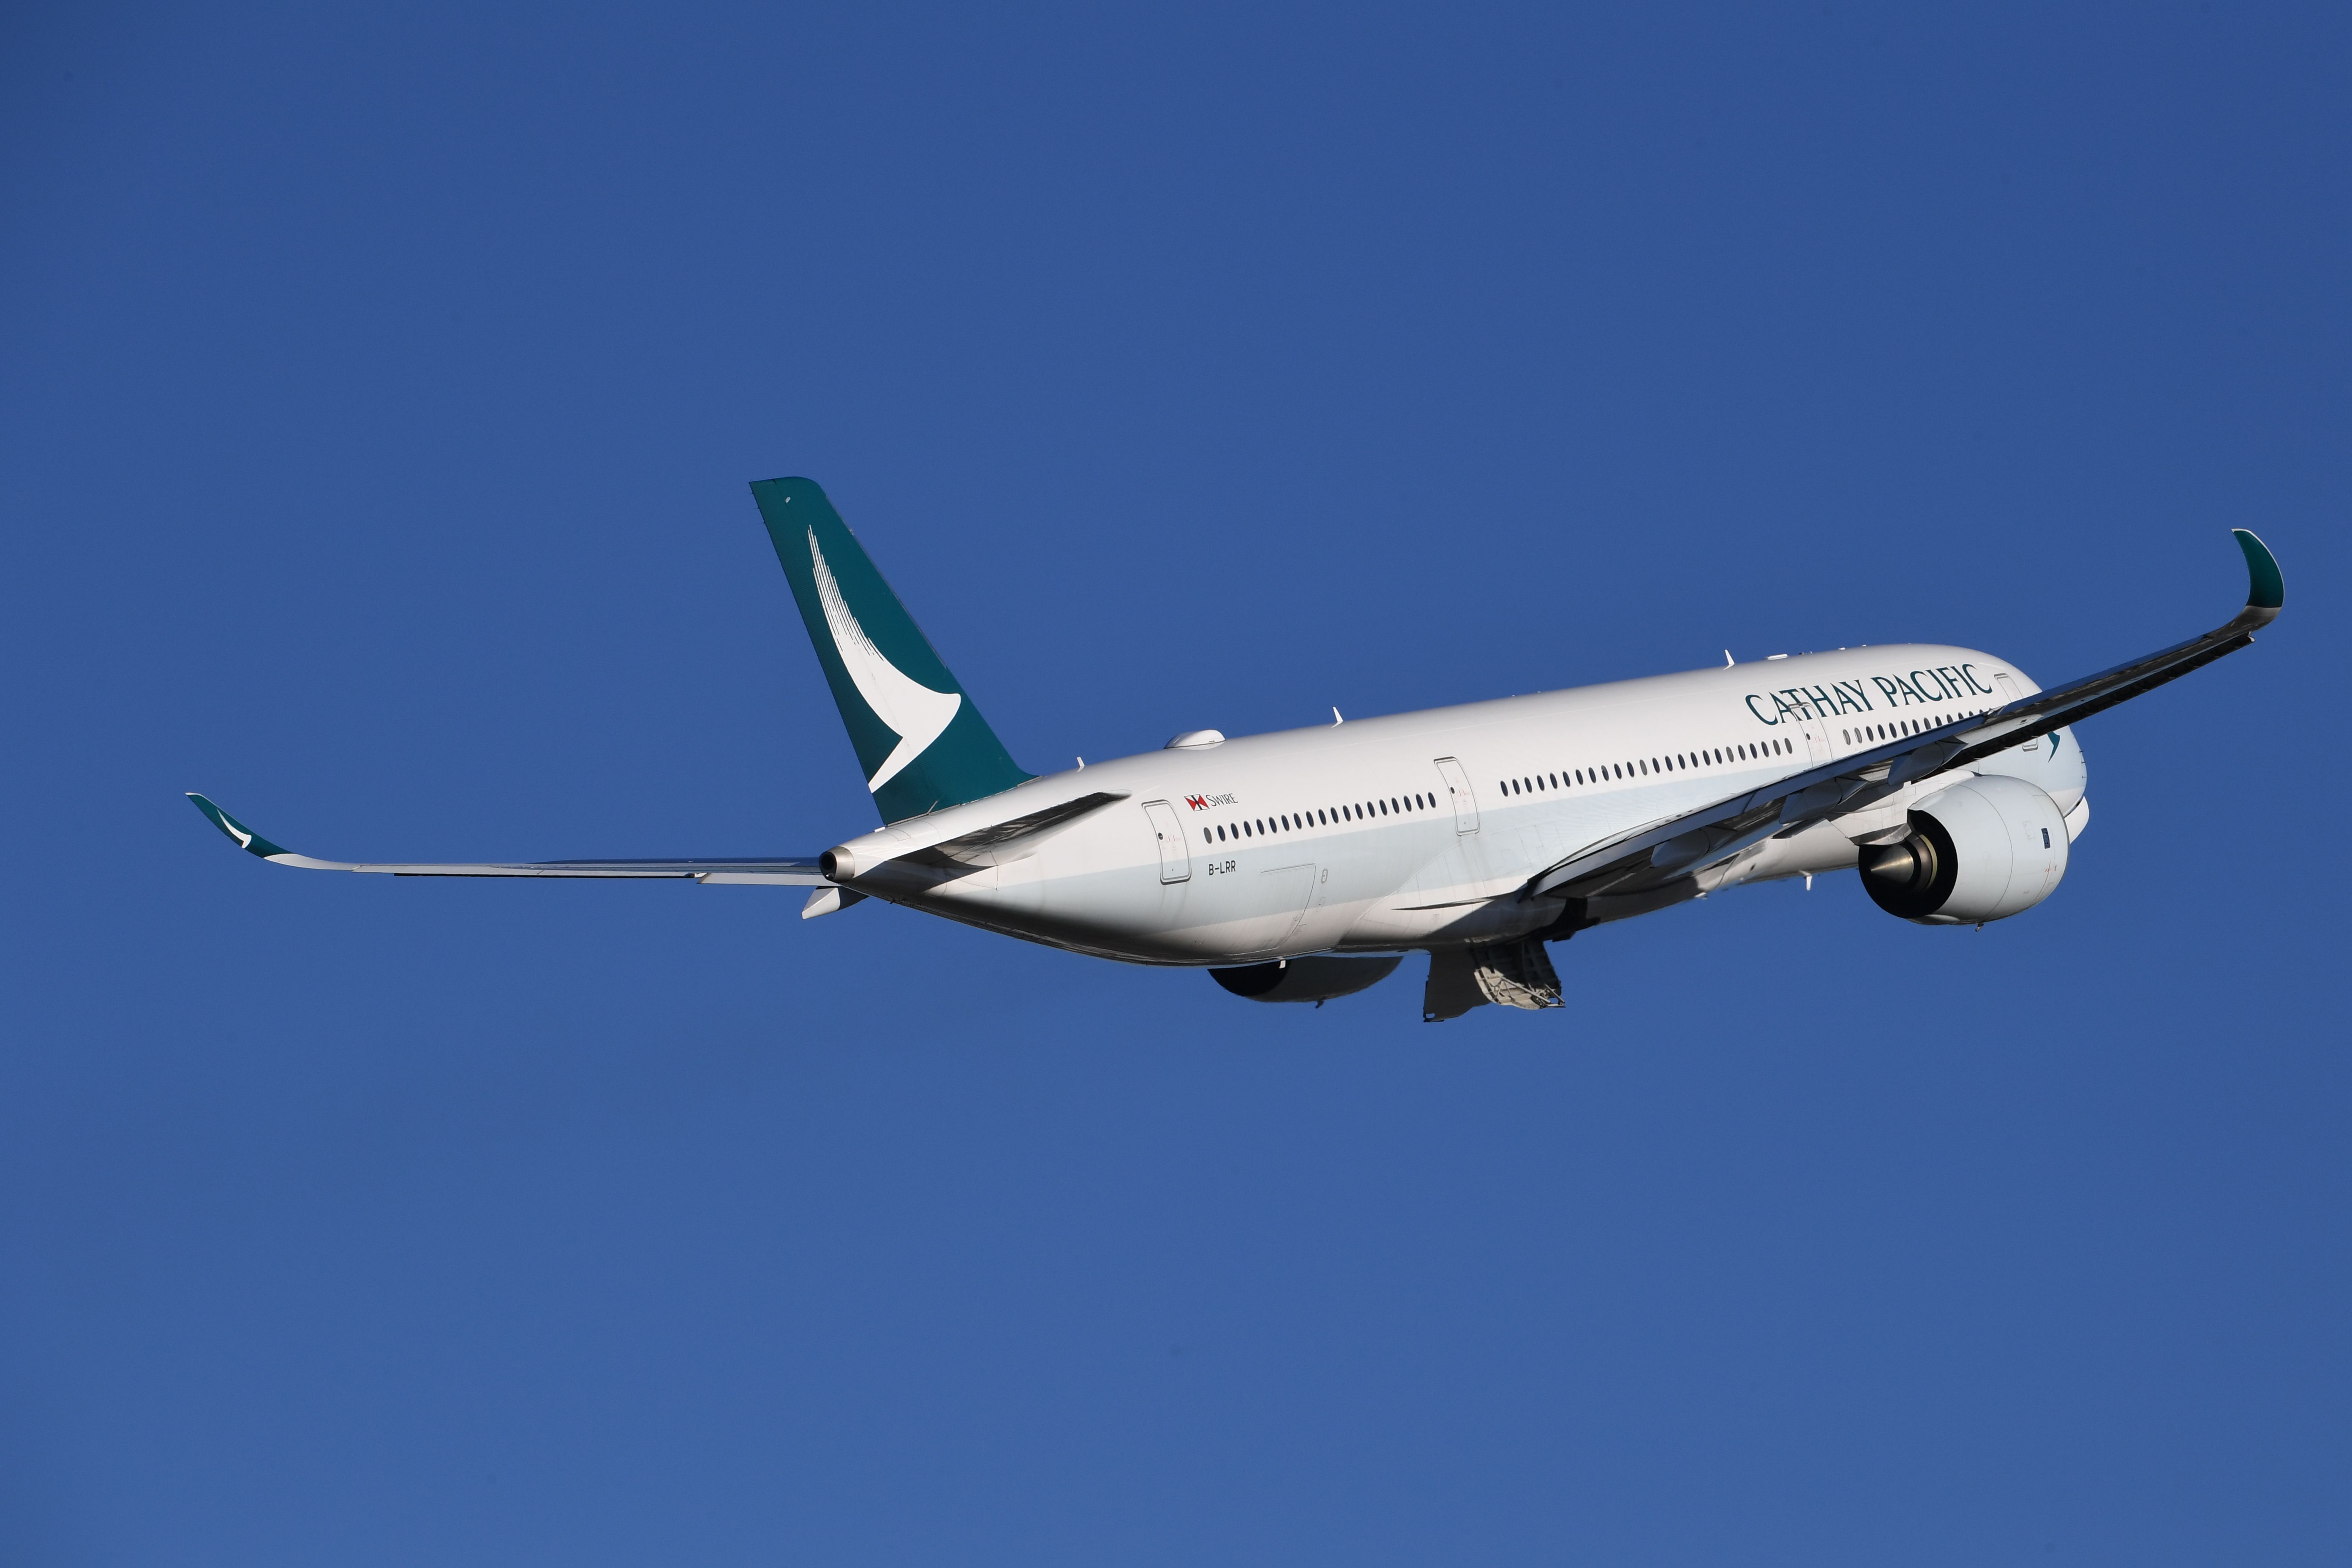 A Cathay Pacific aircraft at Sydney's Kingsford Smith International airport